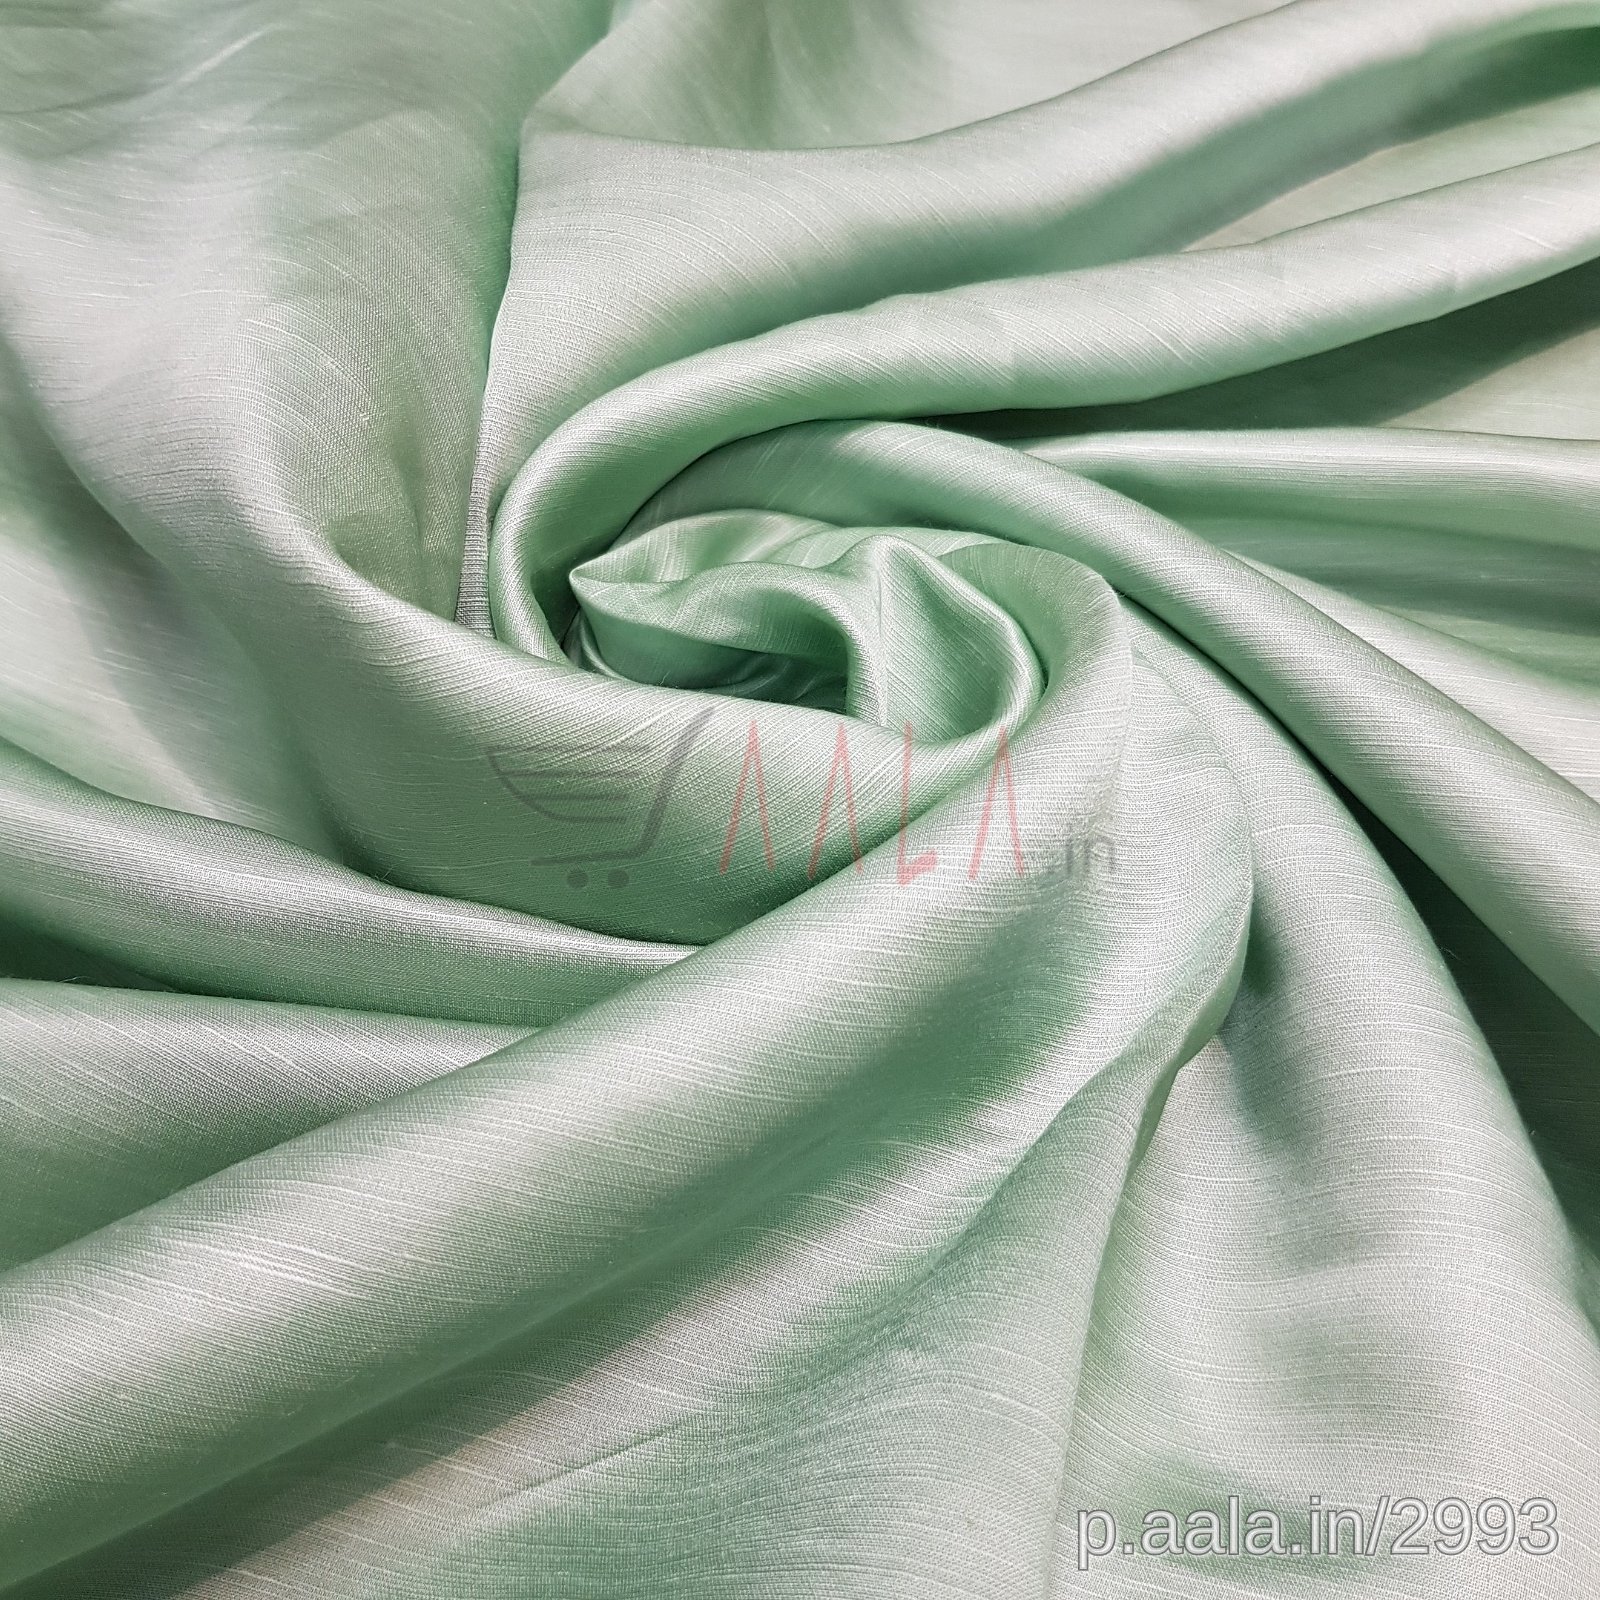 Linen Satin Viscose 44 Inches Dyed Per Metre #2993